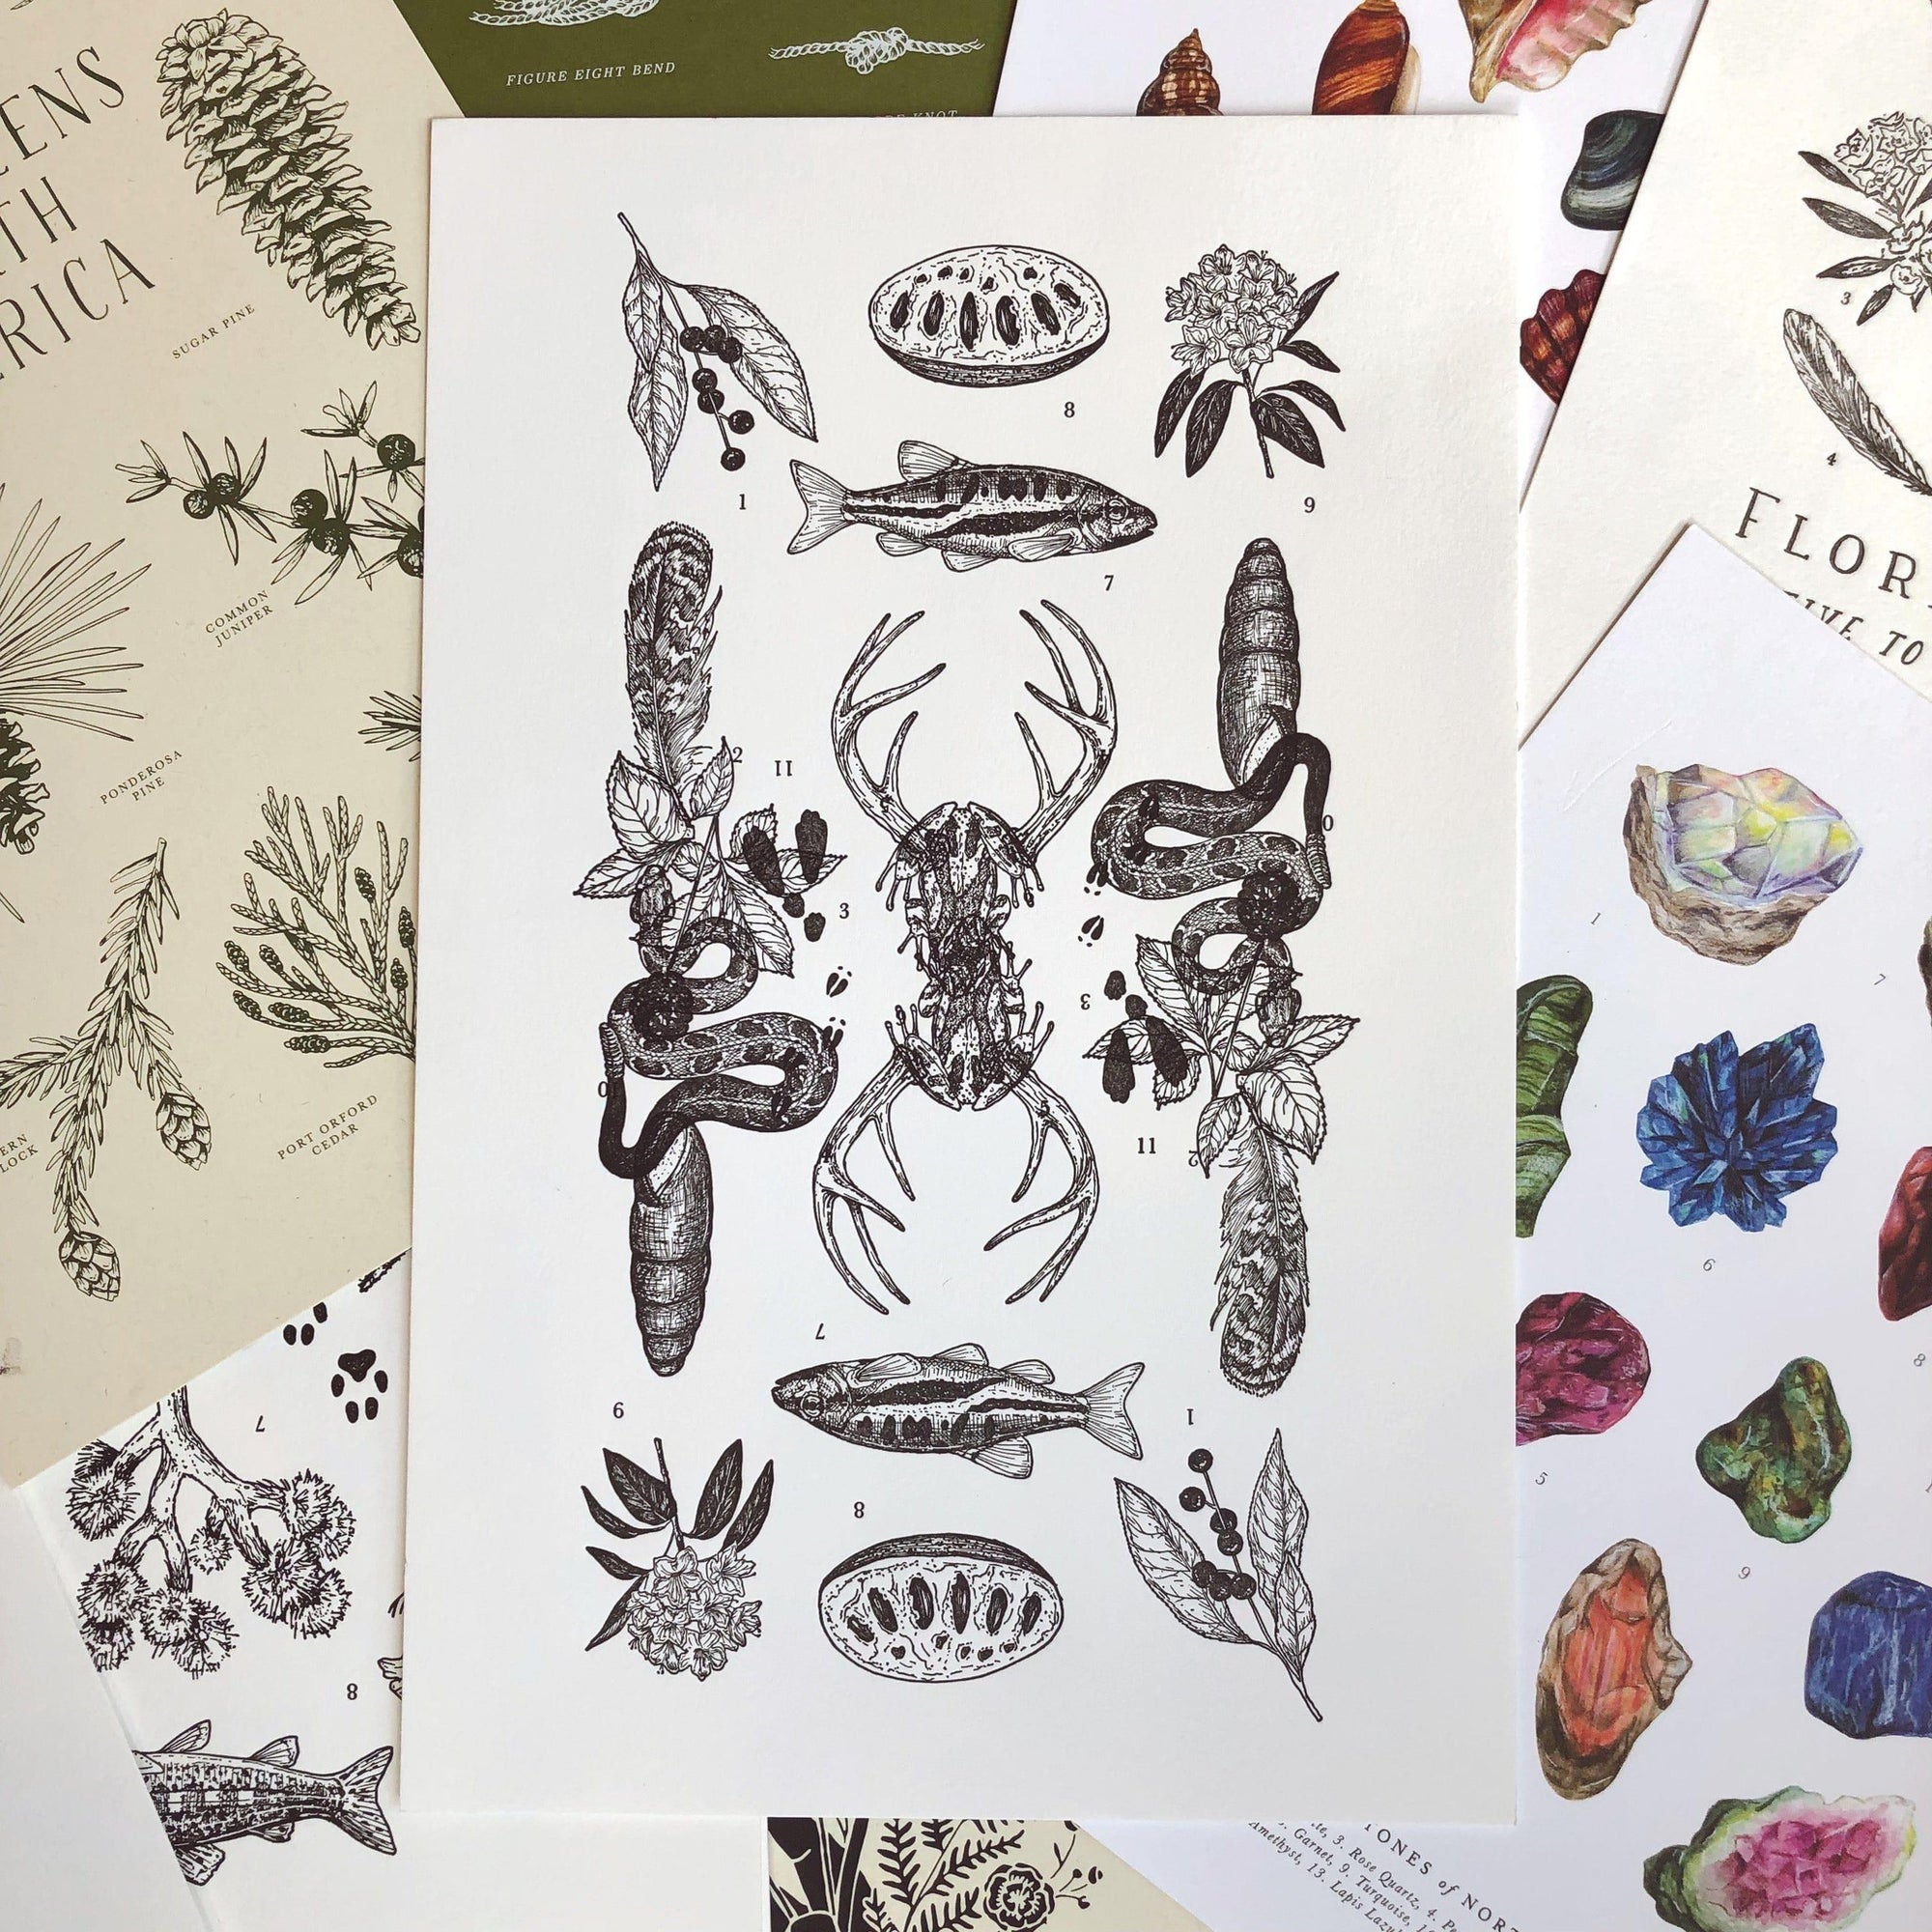 A collection of Mystery Stack cards with various images of plants and animals from The Wild Wander brand.